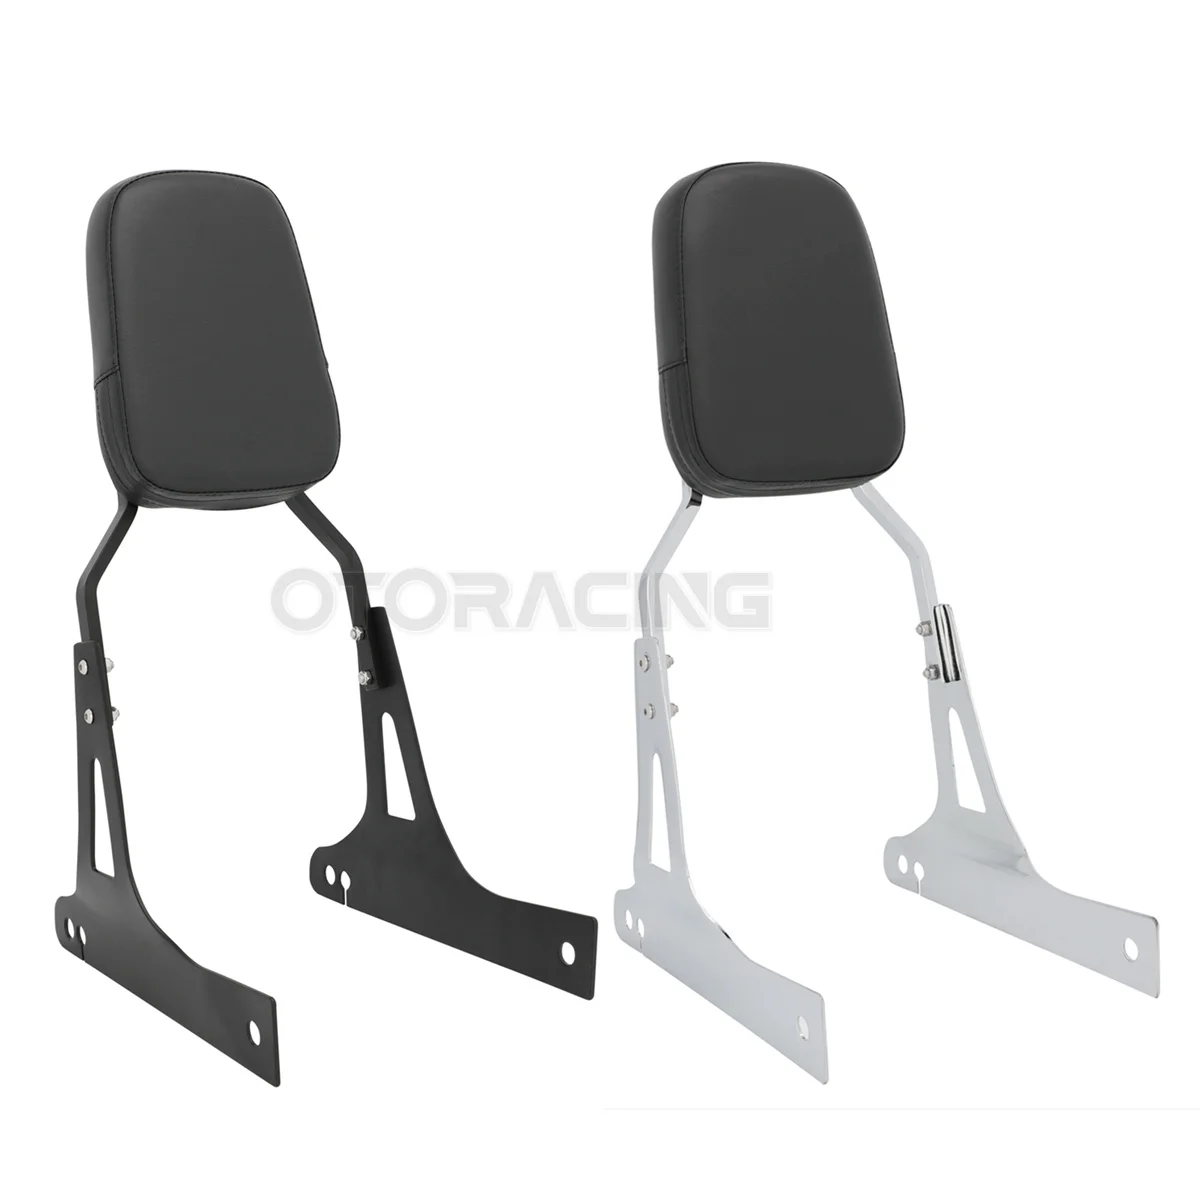 Motorcycle Accessories Backrest Sissy Bar For Harley Dyna FXD FXDB FXDC FXDI Street Bob Wide Glide Low Rider